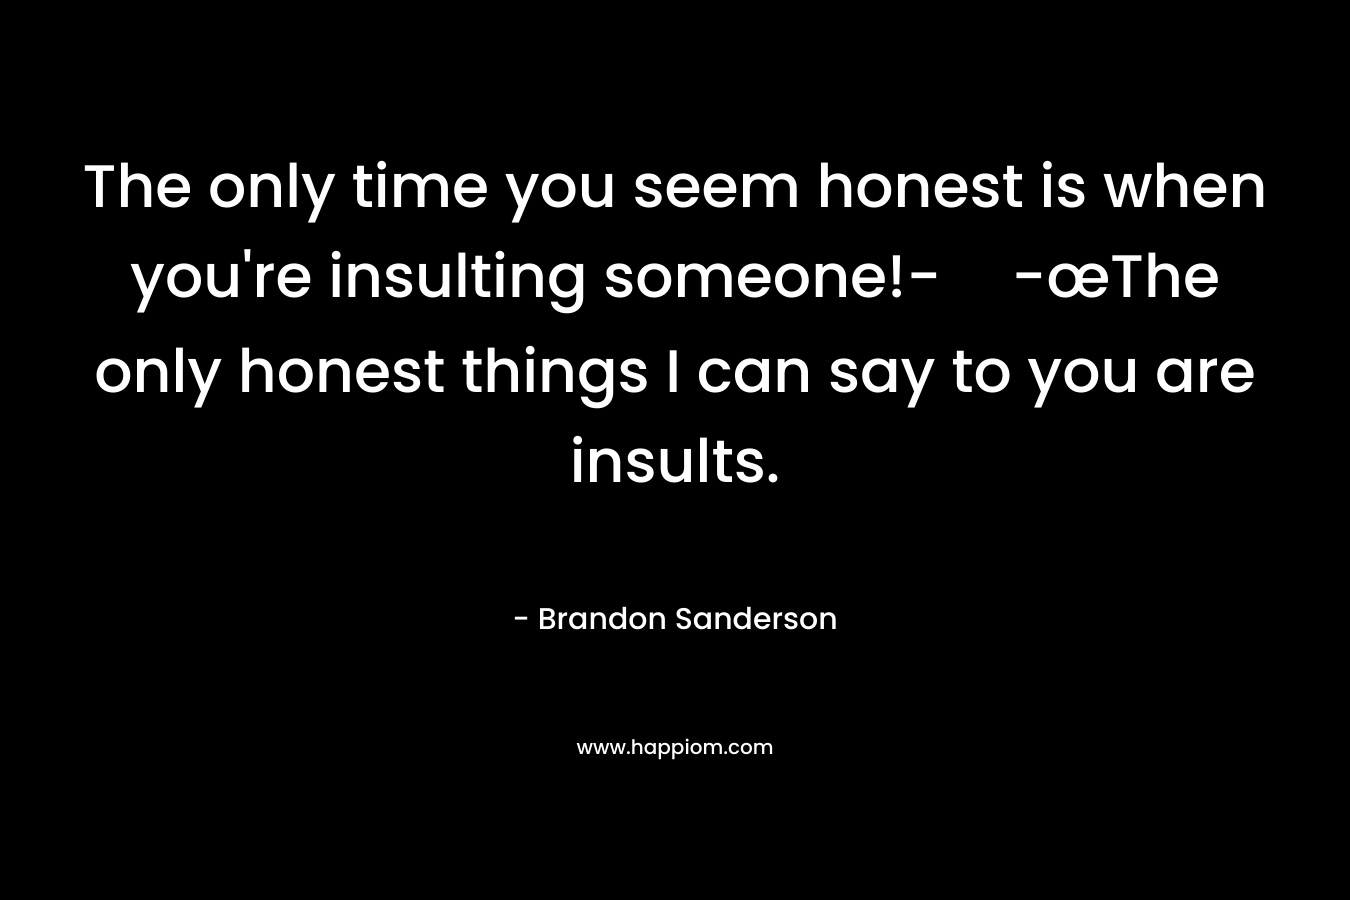 The only time you seem honest is when you’re insulting someone!--œThe only honest things I can say to you are insults. – Brandon Sanderson